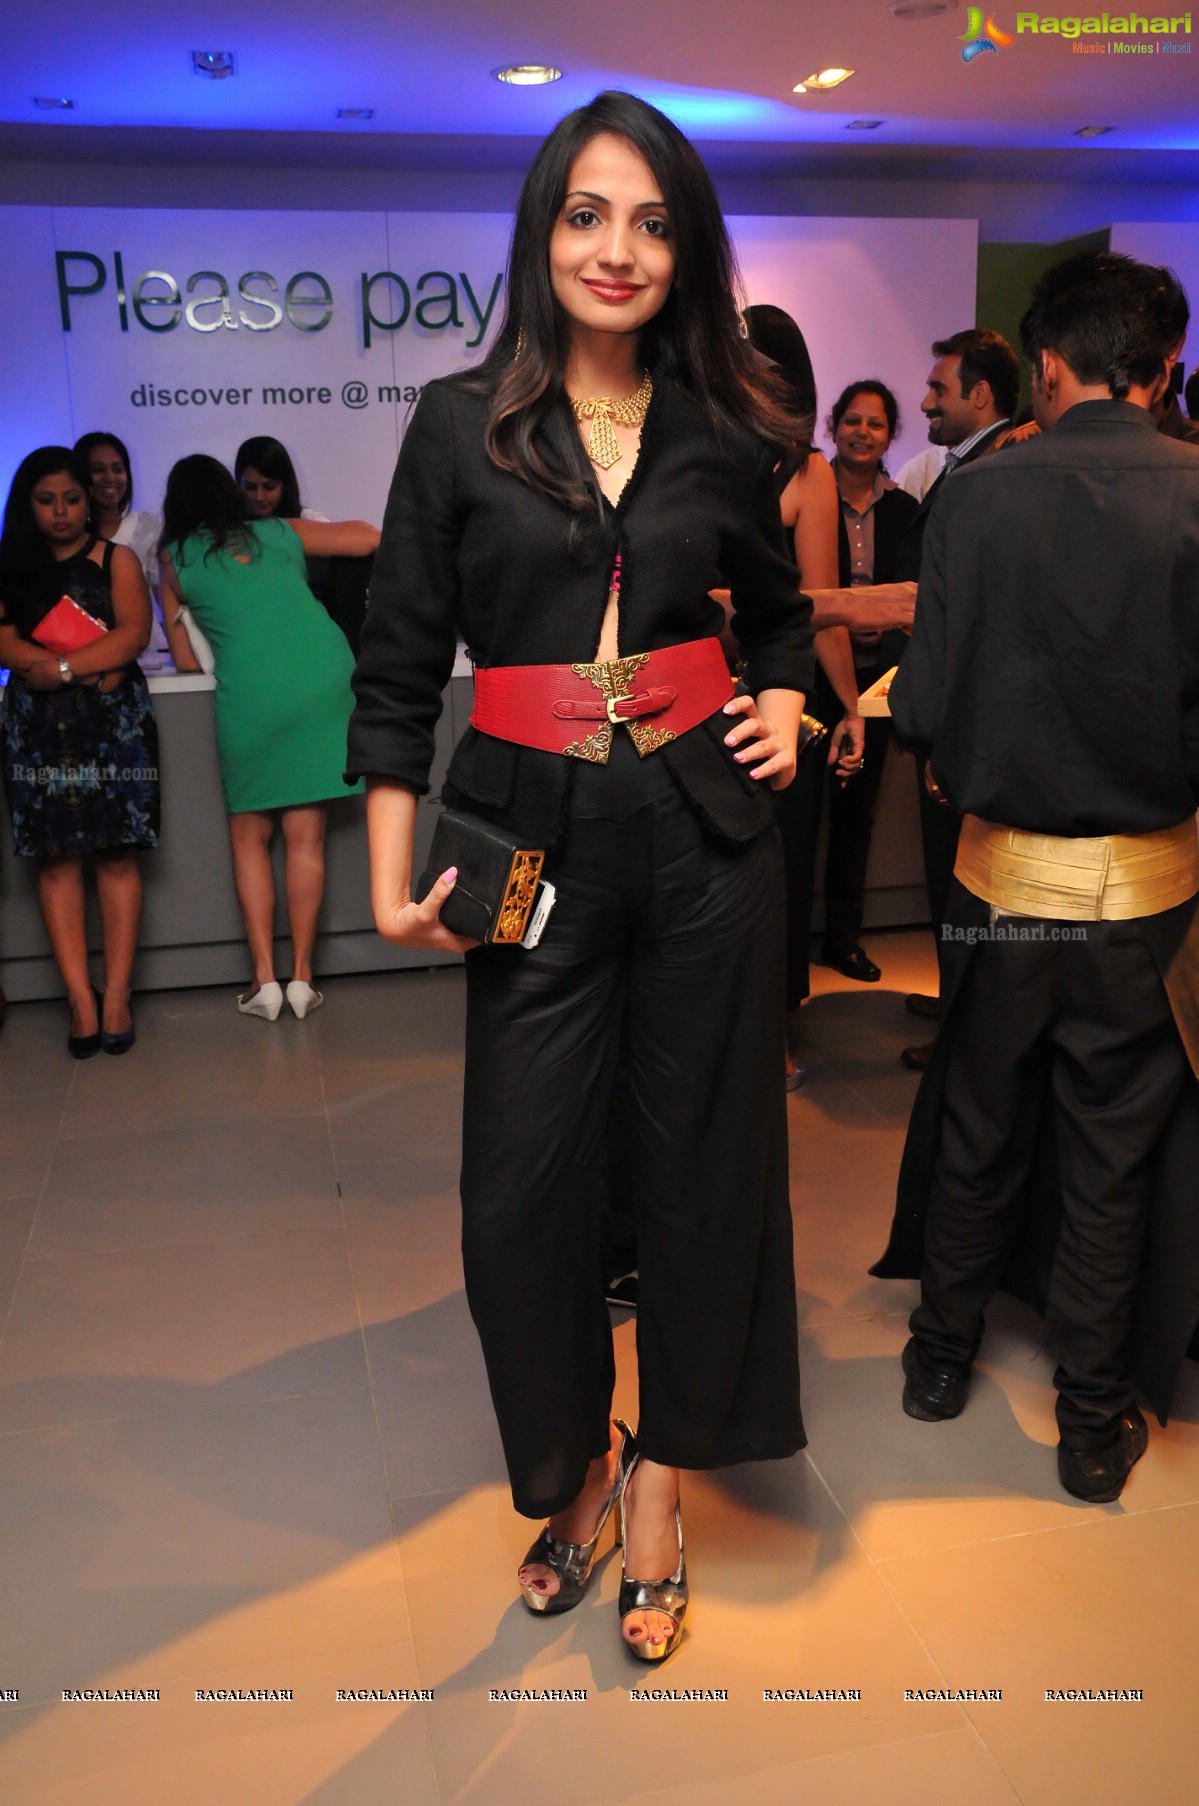 Marks & Spencer Launch in Hyderabad